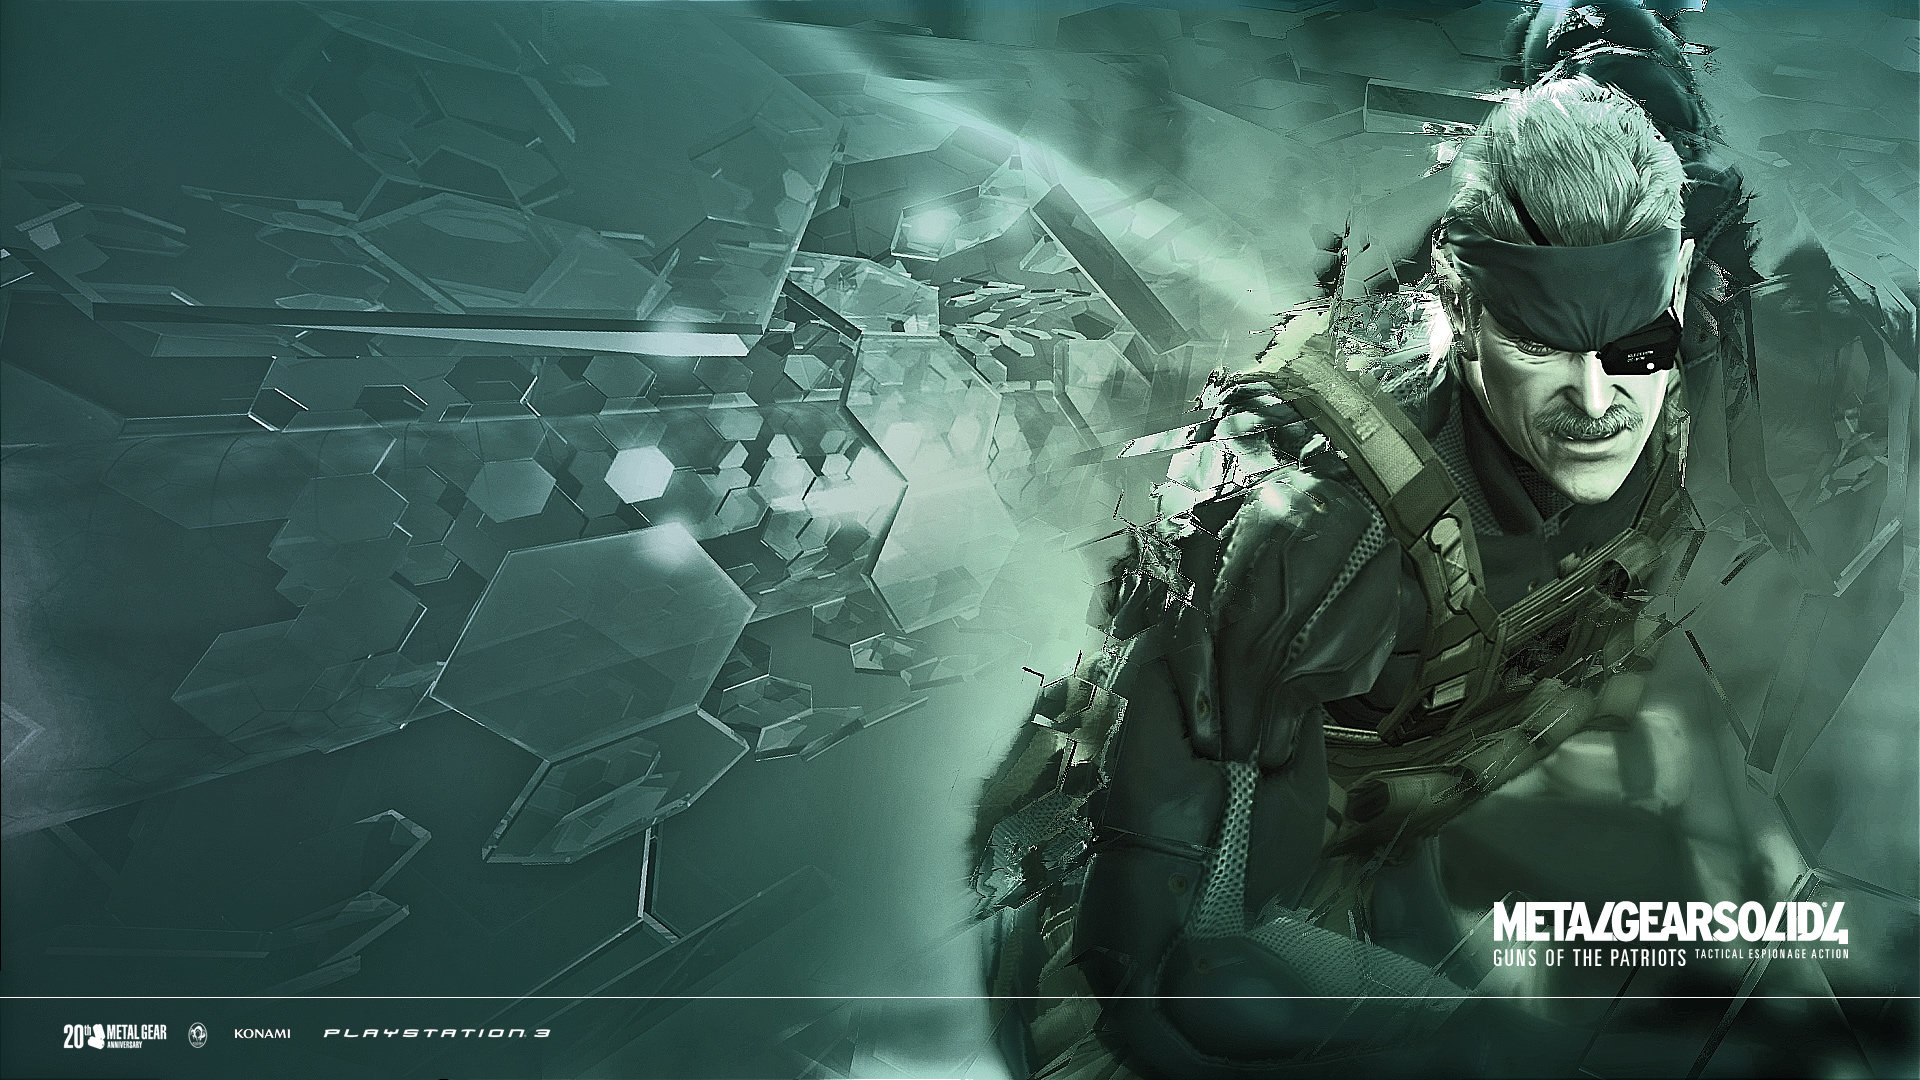 Awesome Metal Gear Solid Free Wallpaper Id - Hd Wallpaper Ps Vita - HD Wallpaper 